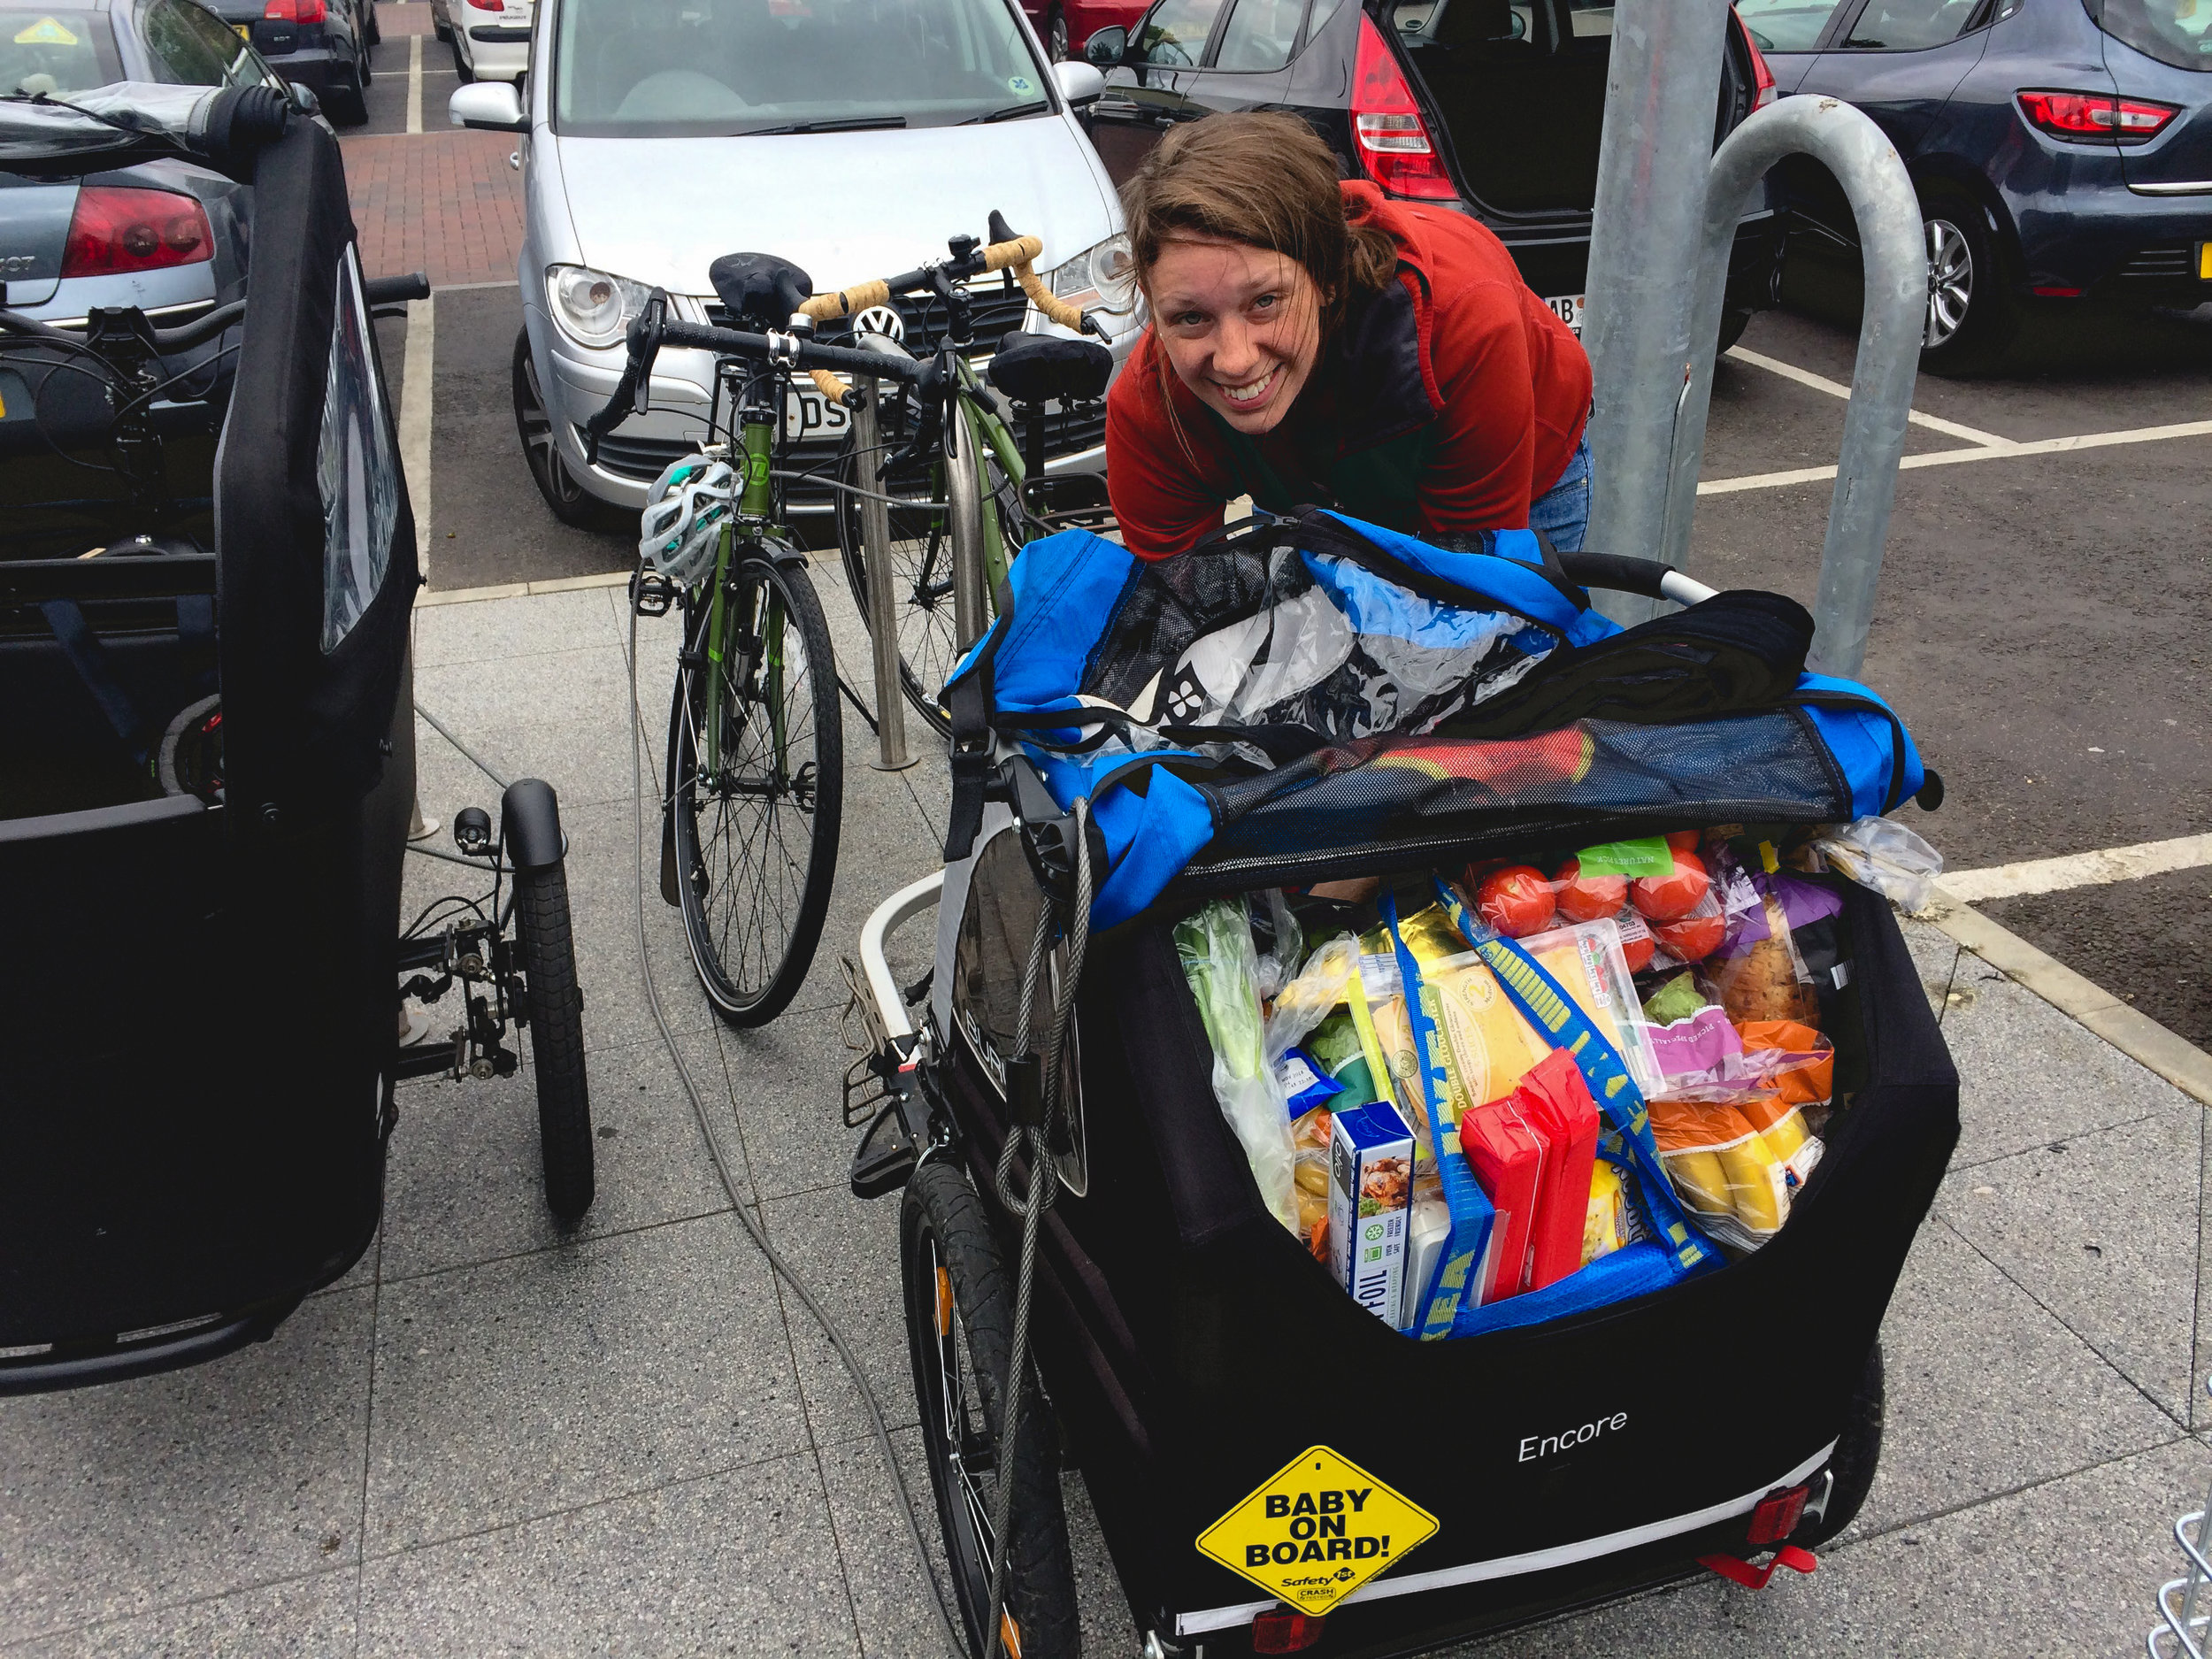  We inveriably are packed to the gills during the weekly grocery run. (We also somehow always justify leaving some panniers at home. We tell ourselves that this week won't be as bad...) 